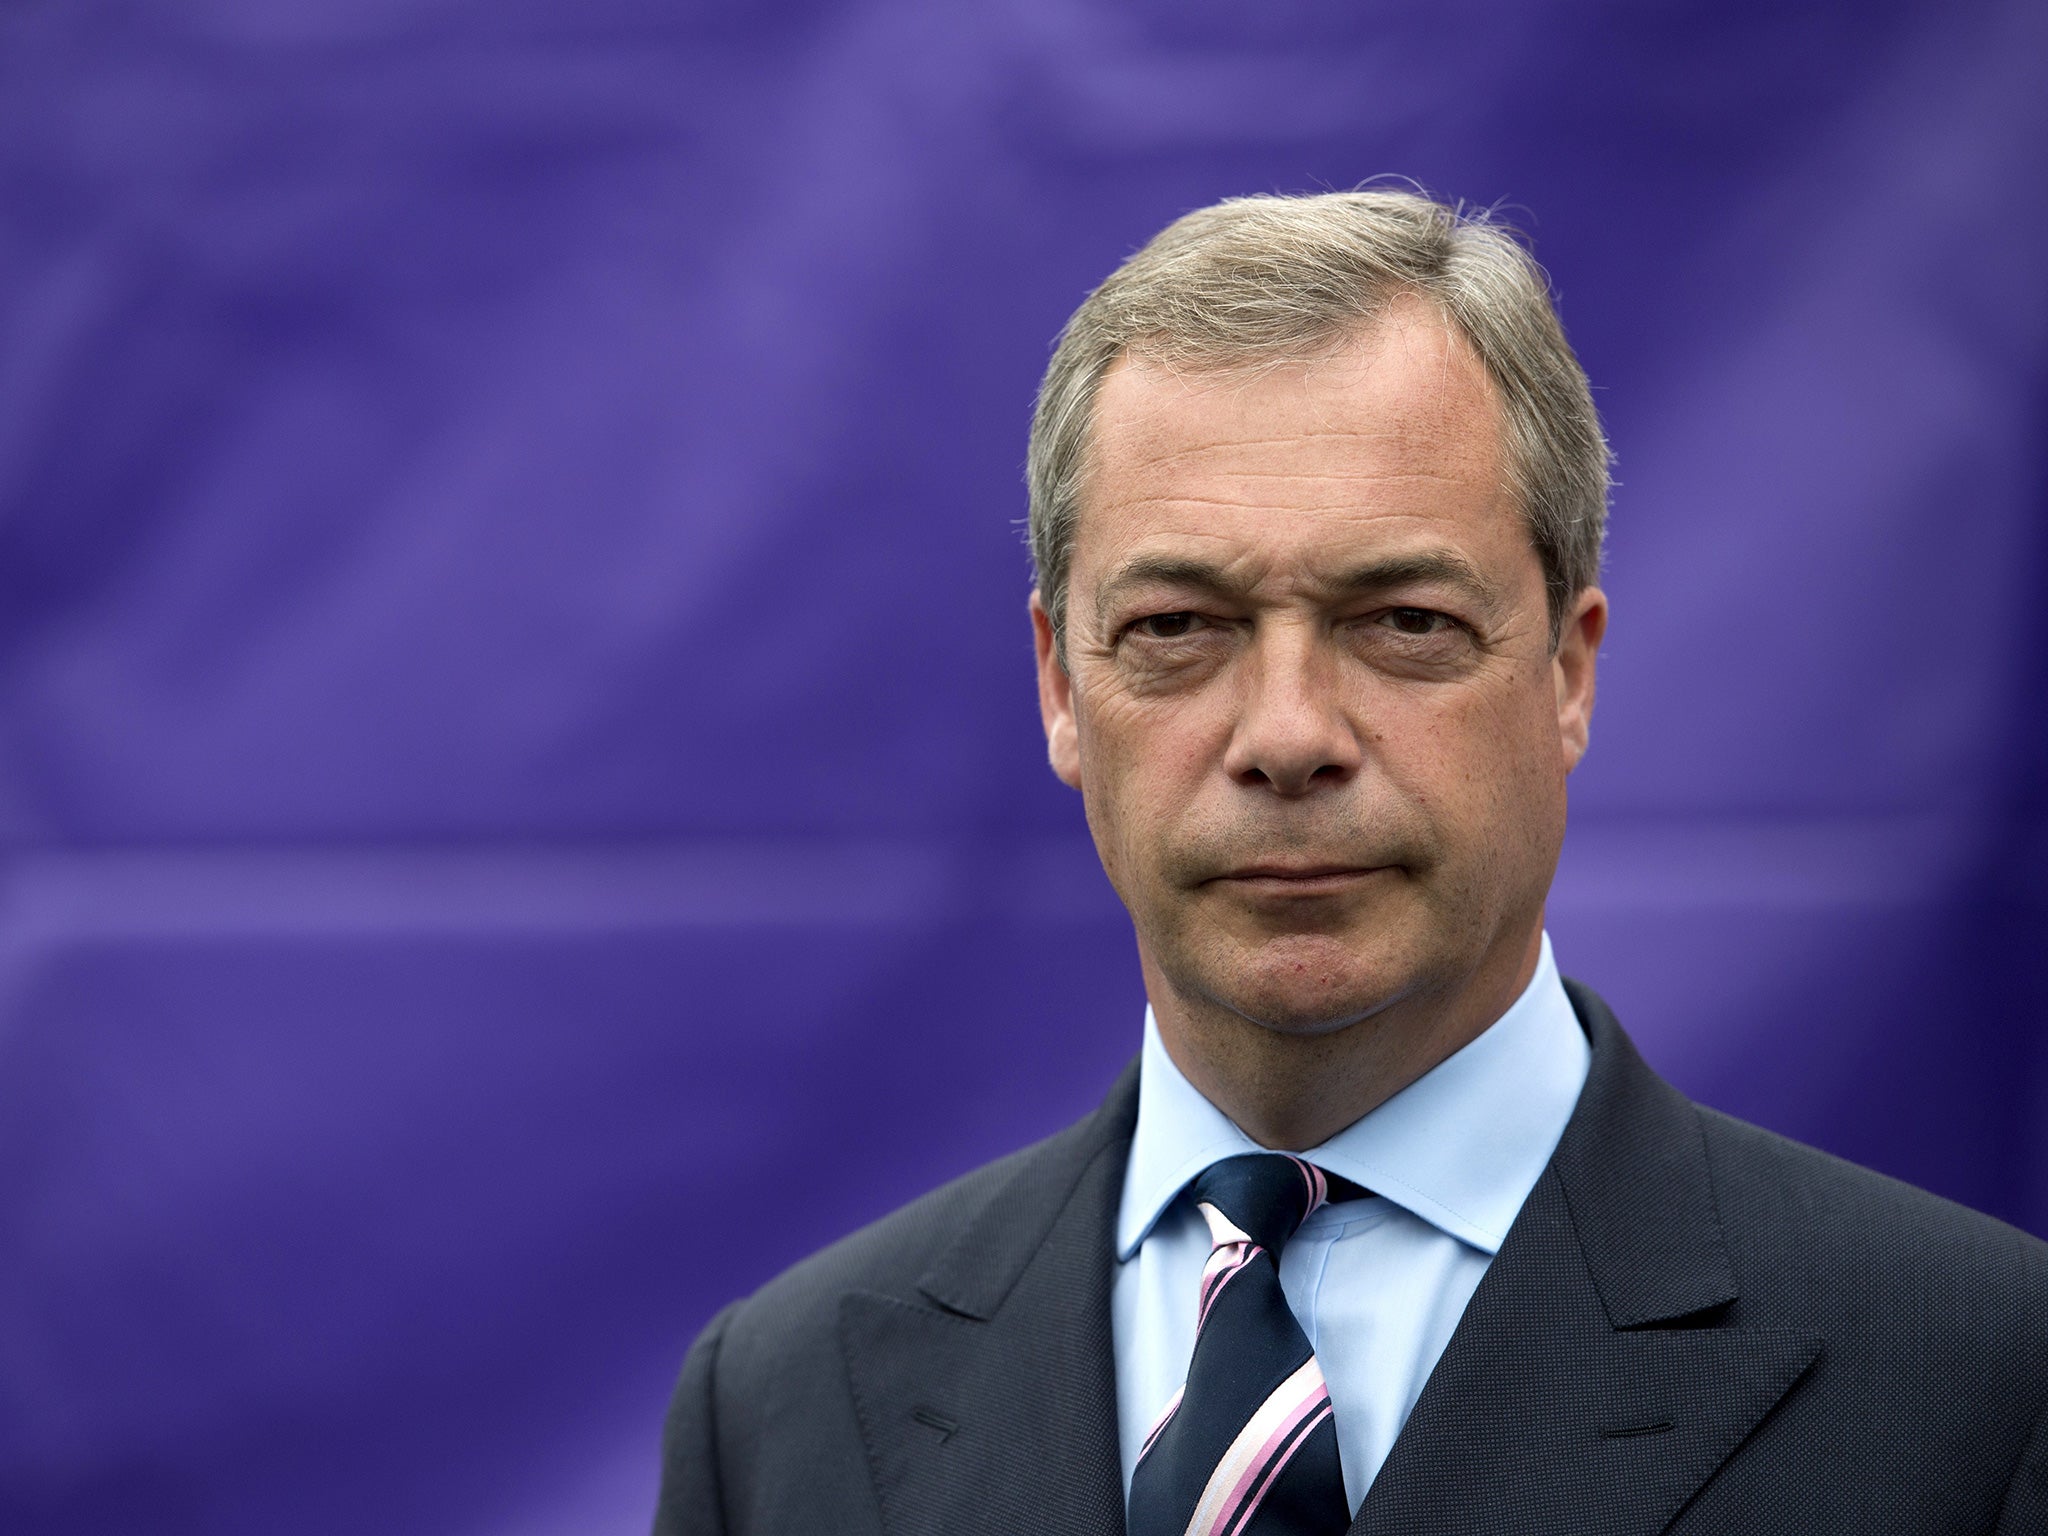 Farage has been condemned after he called for much of the legislation banning racial discrimination at work to be scrapped